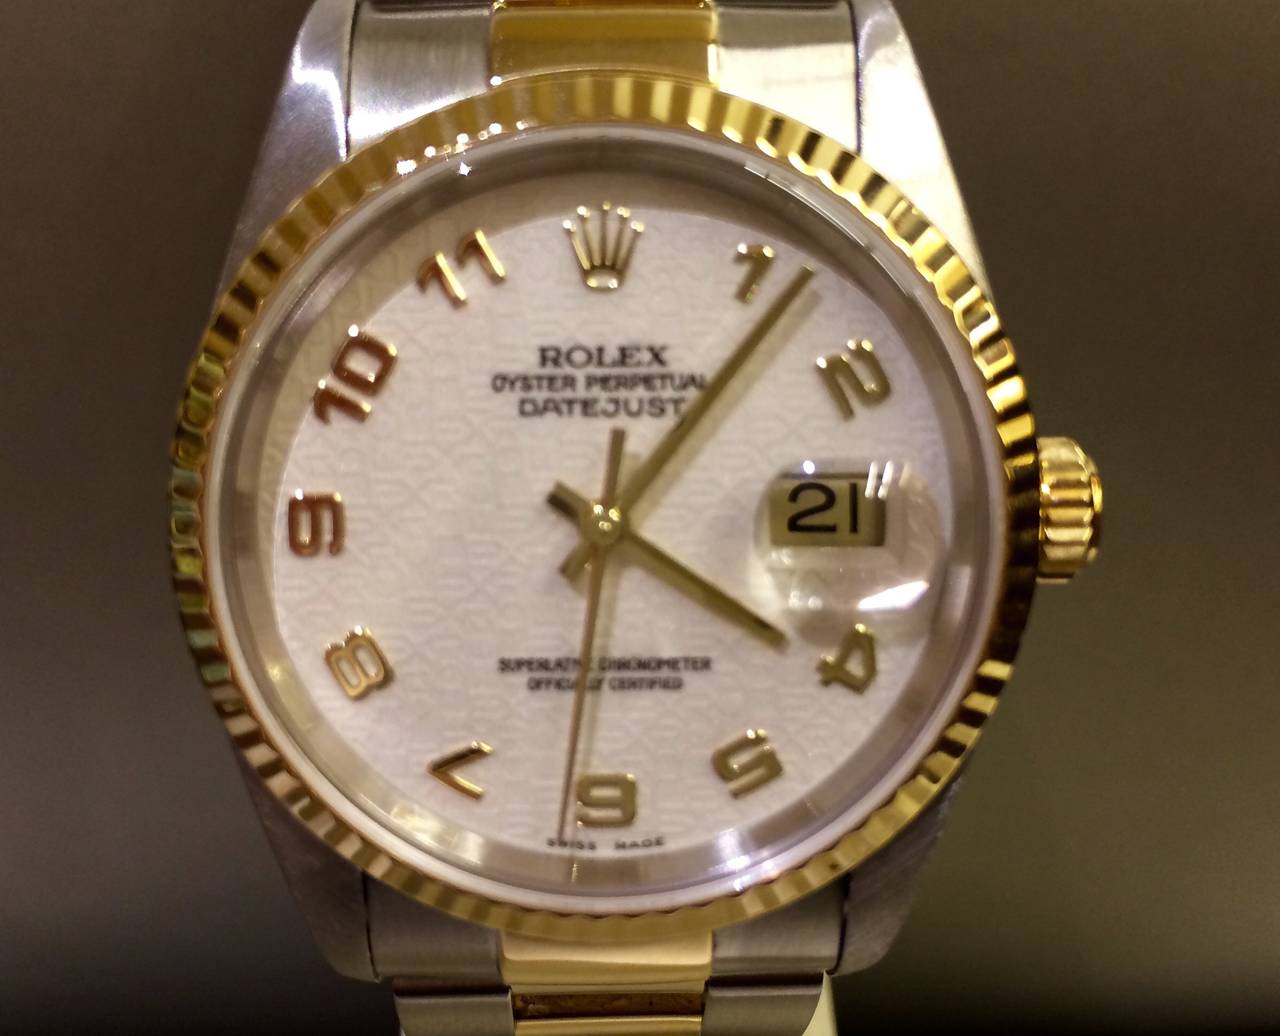 Rolex Yellow Gold Stainless Steel Oyster Perpetual Datejust Wristwatch Ref 16233 2